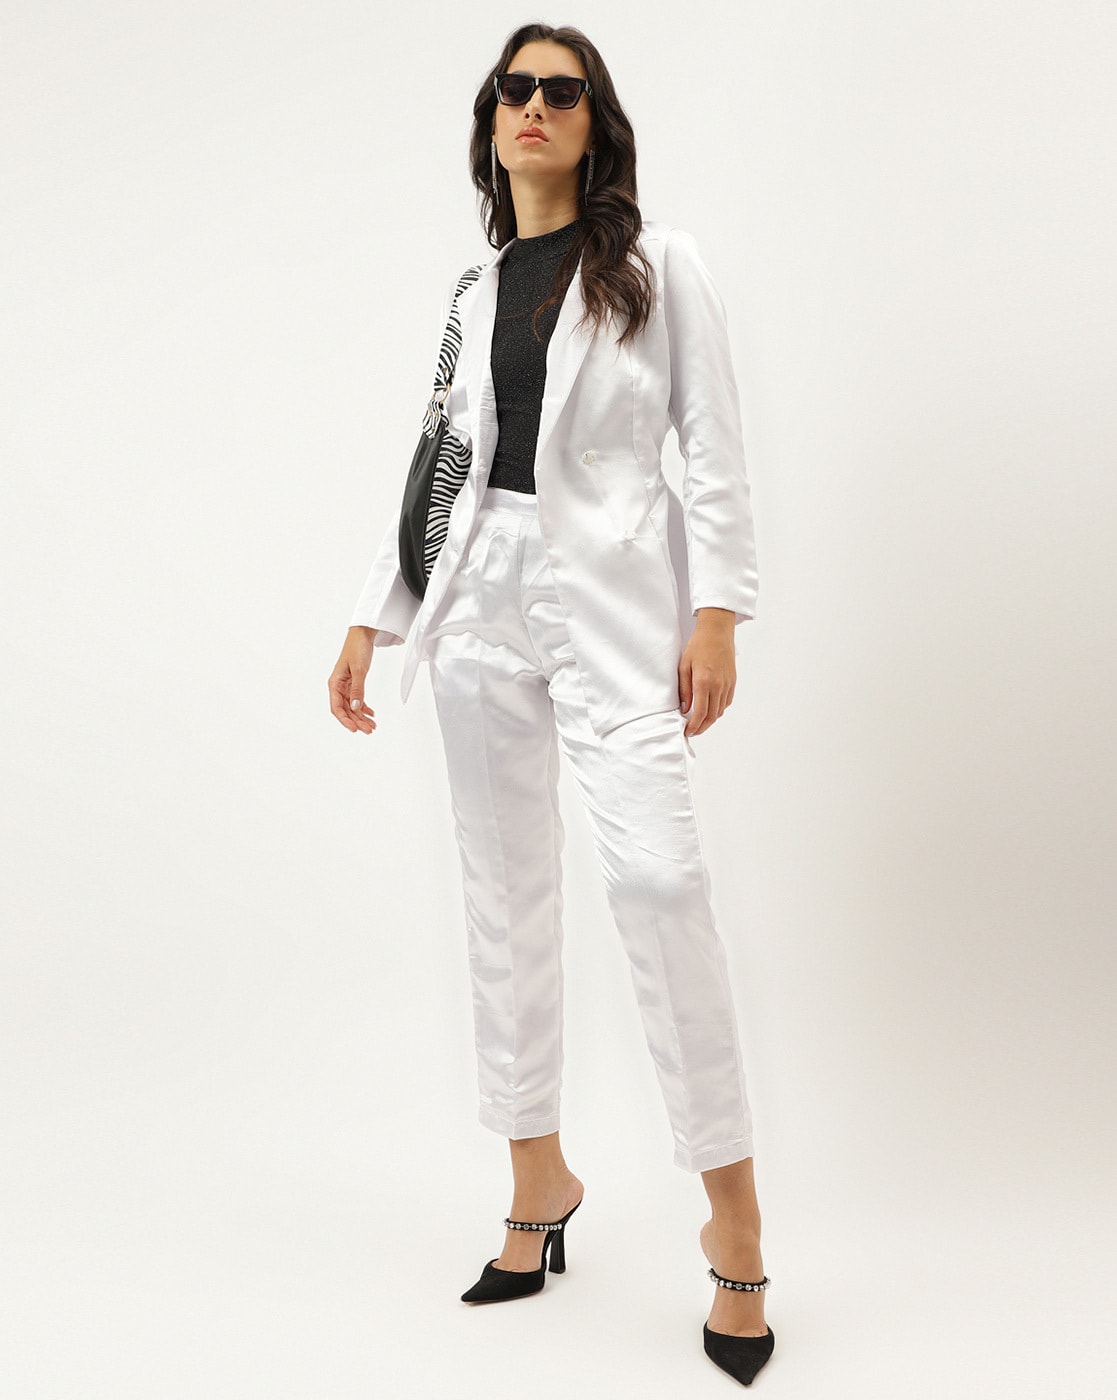 Wedding Guest Suits | Trouser Suits For Female Wedding Guests | boohoo UK